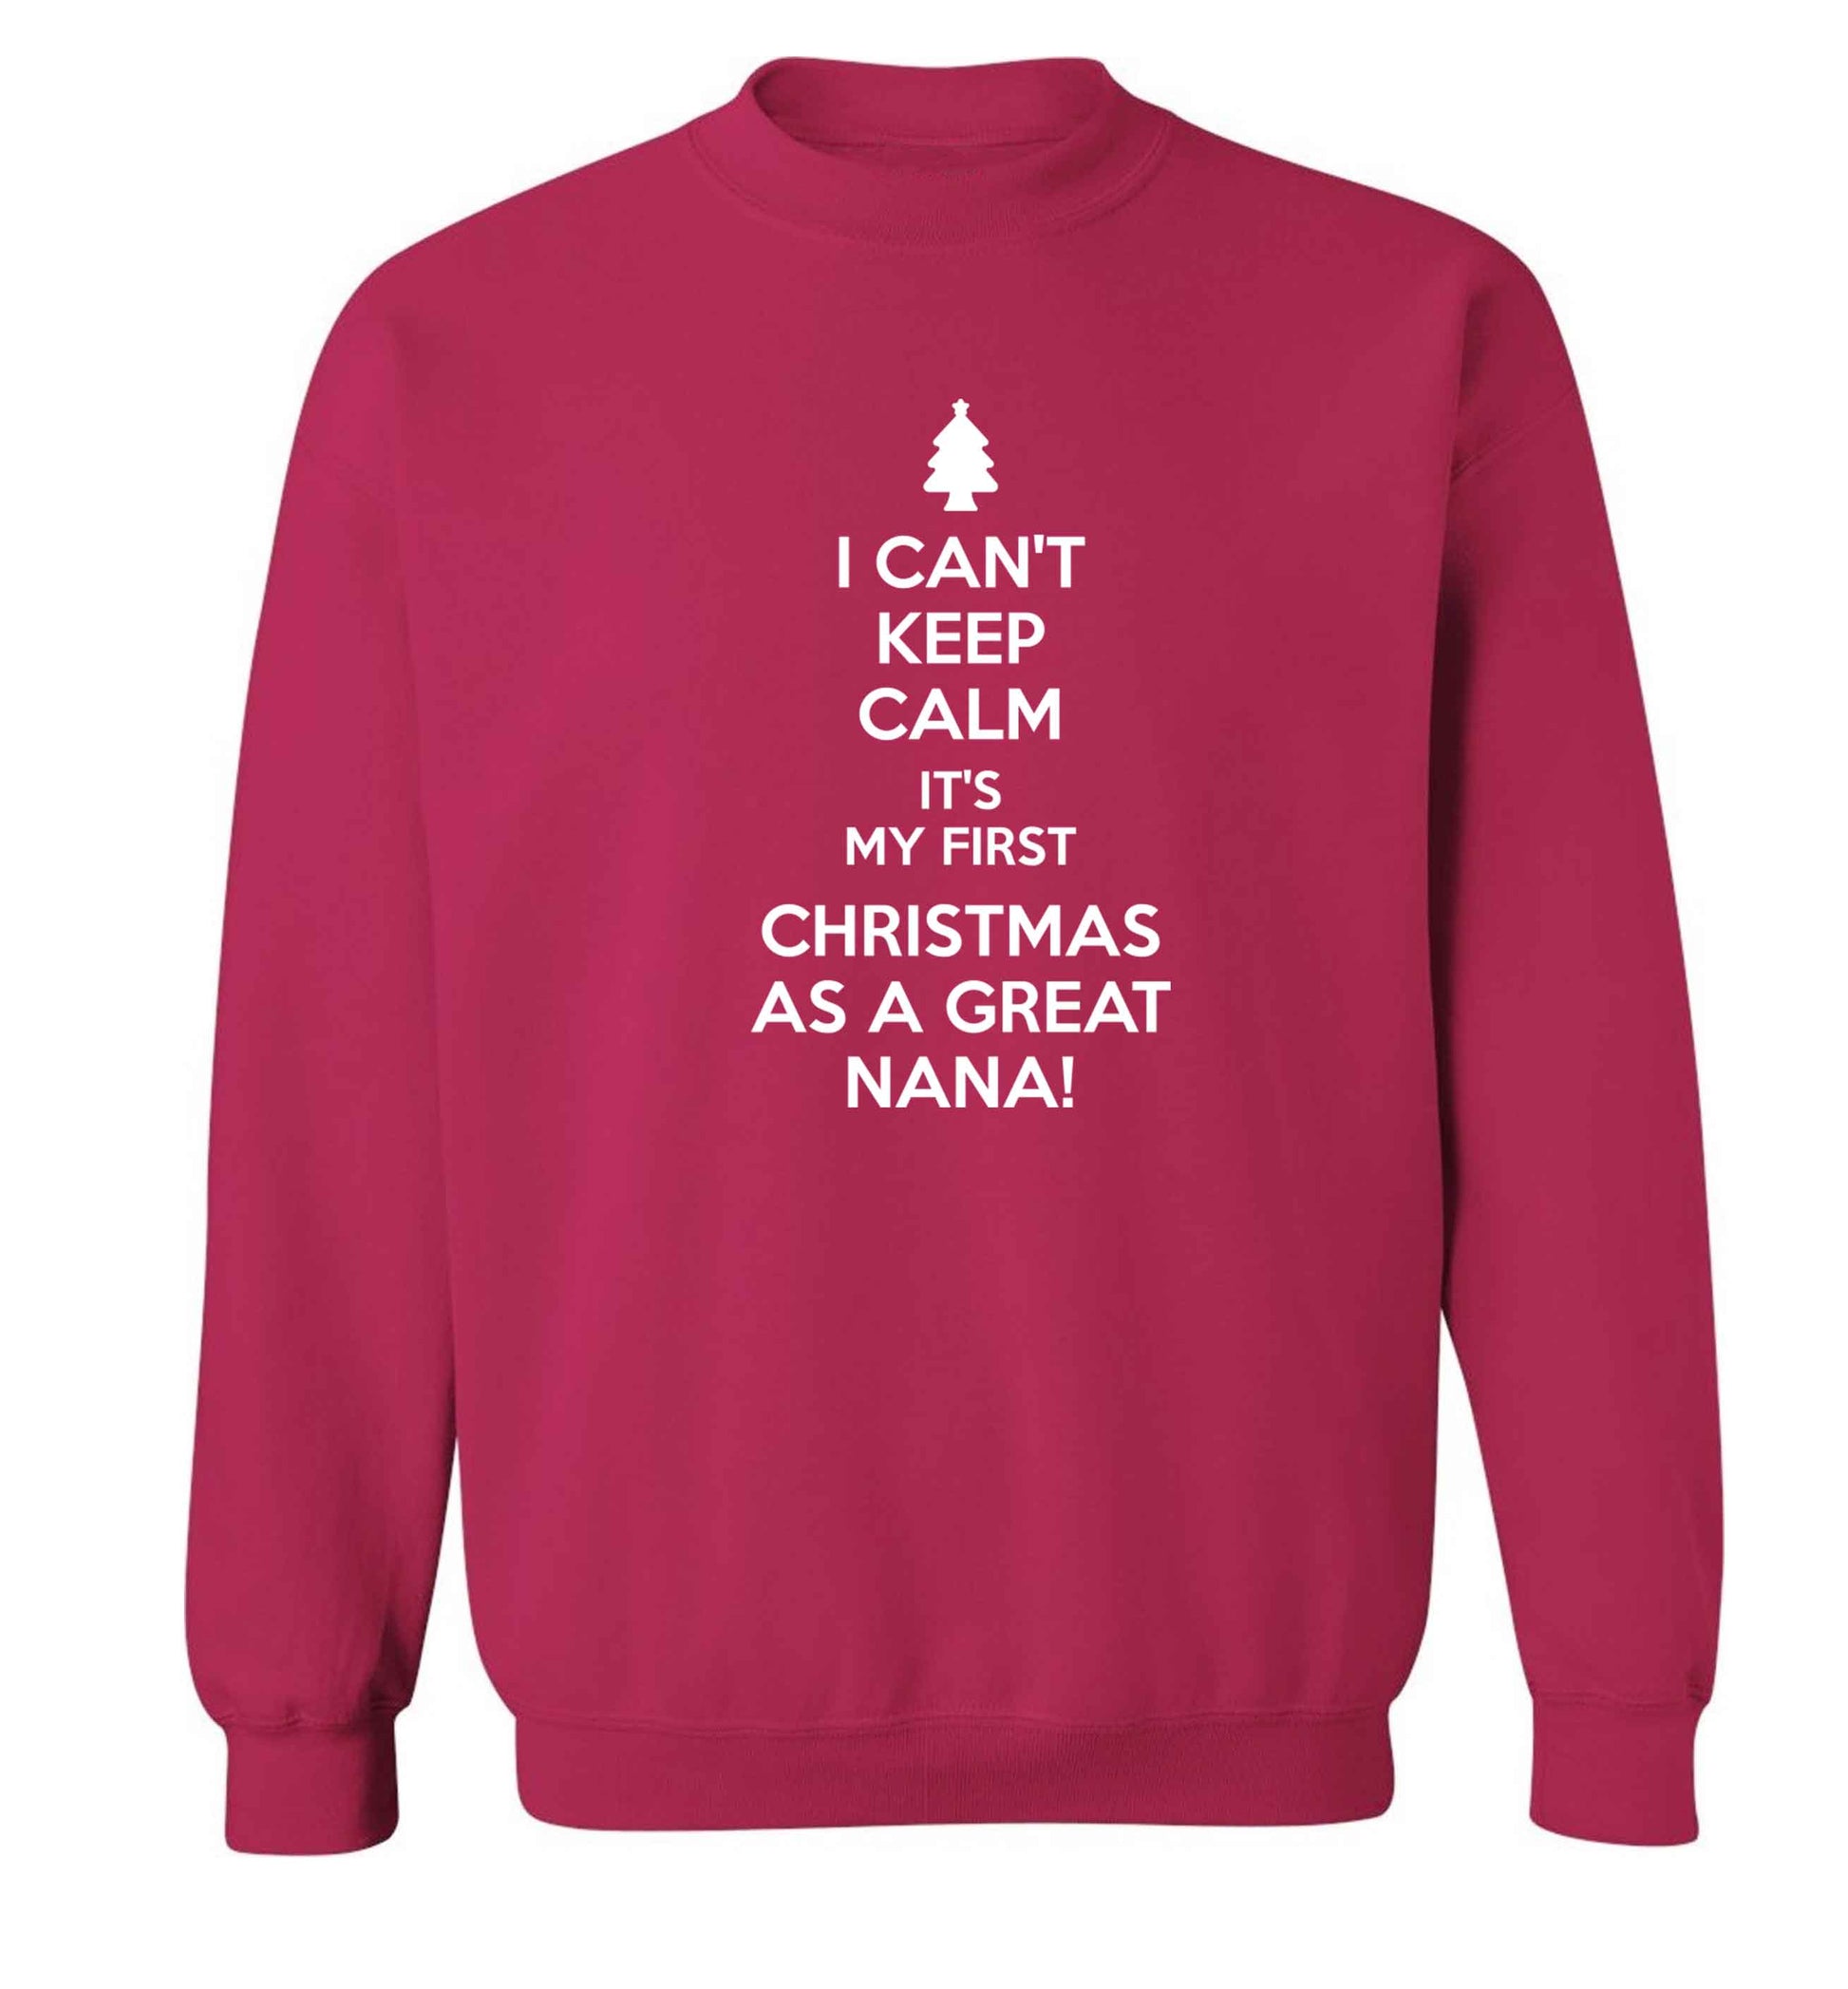 I can't keep calm it's my first Christmas as a great nana! Adult's unisex pink Sweater 2XL